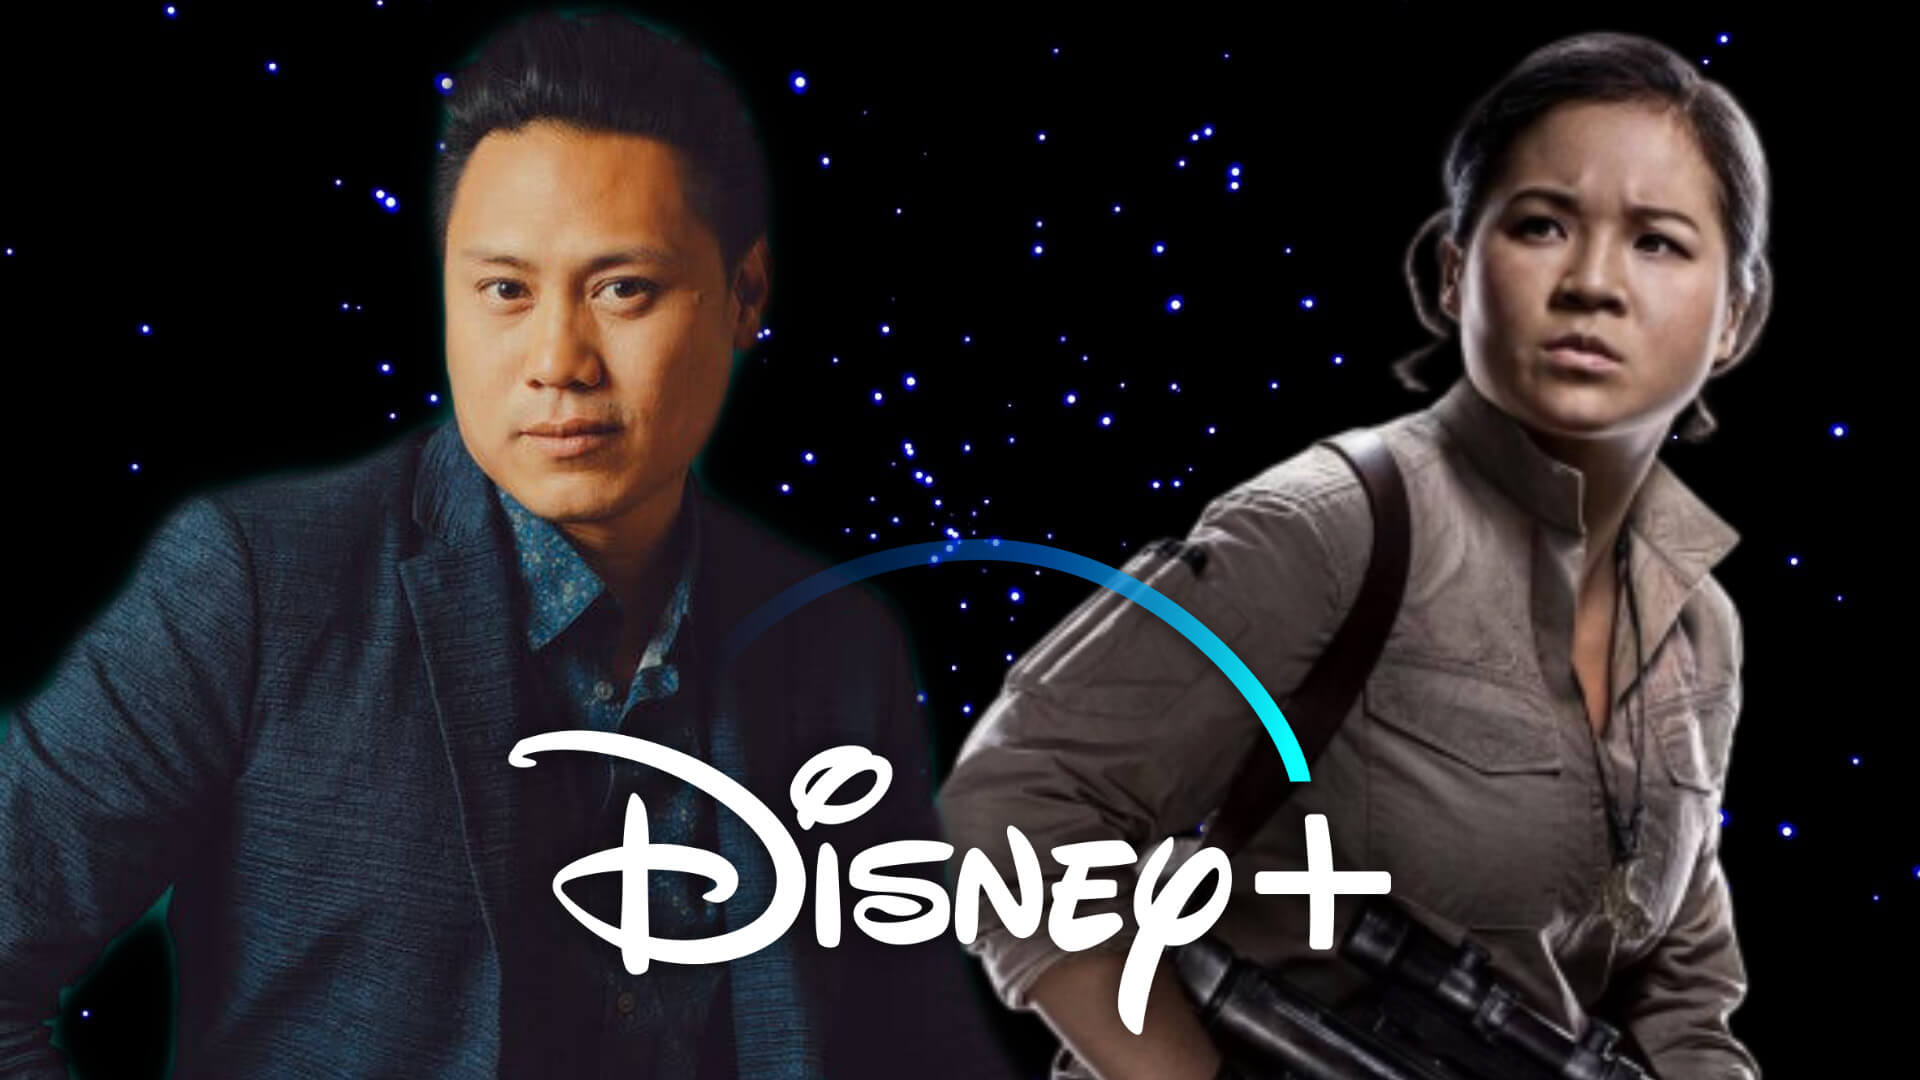 ‘Crazy Rich Asians’ Director Wants To Tackle A Rose Tico Series on Disney+